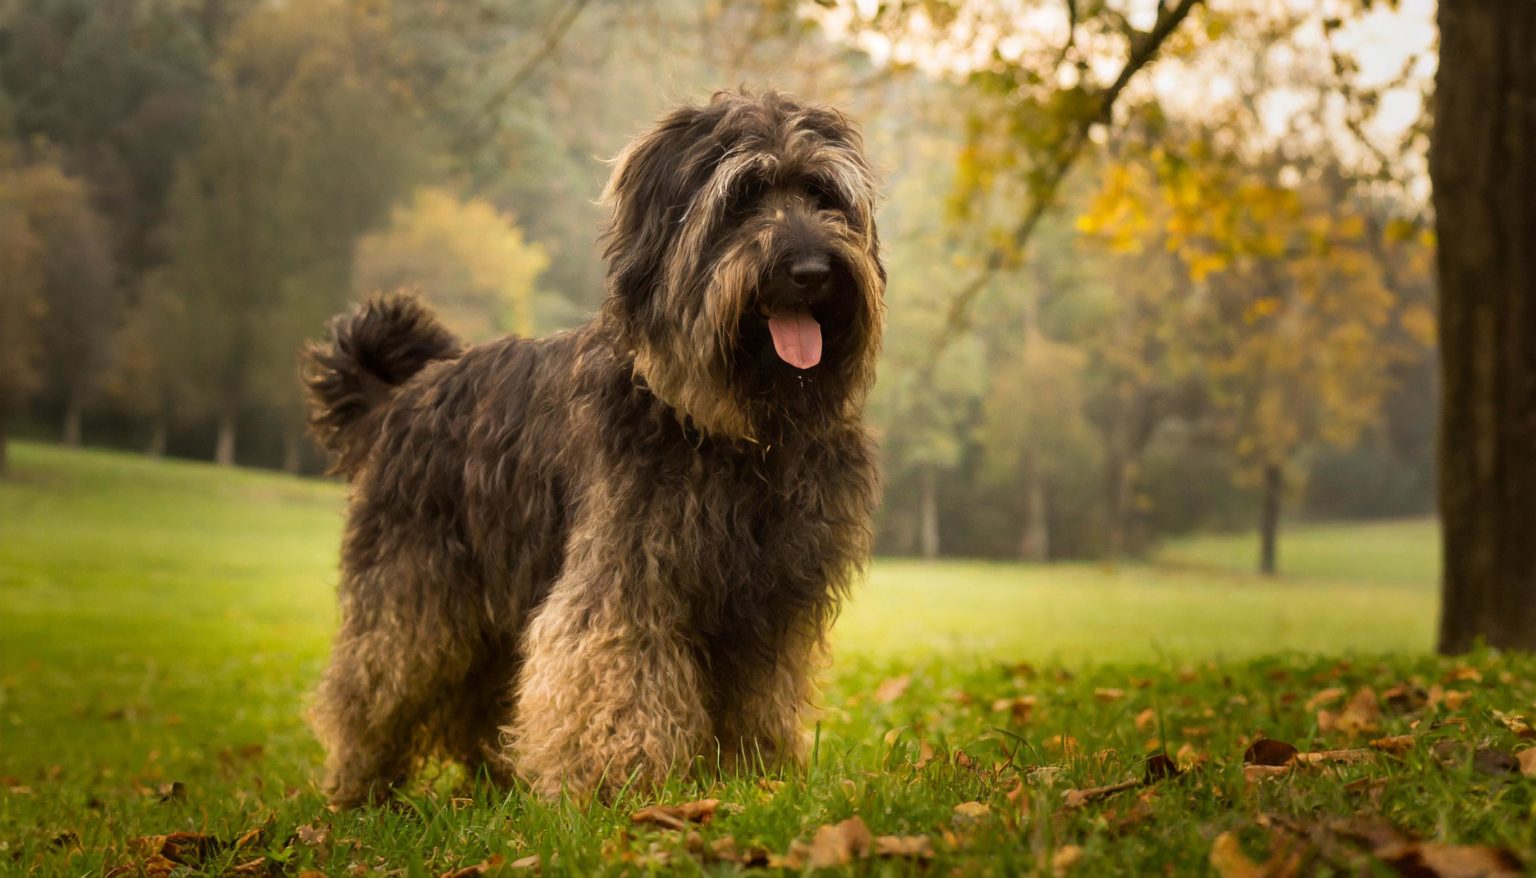 The Catalan Sheepdog originates from Catalonia in Spain and was bred as a herding dog. It is thought to have been introduced by the Romans thousands of years ago, when they invaded Spain. It was then used to guard the flock and also to herd cattle, but it's exact bloodline is uncertain.